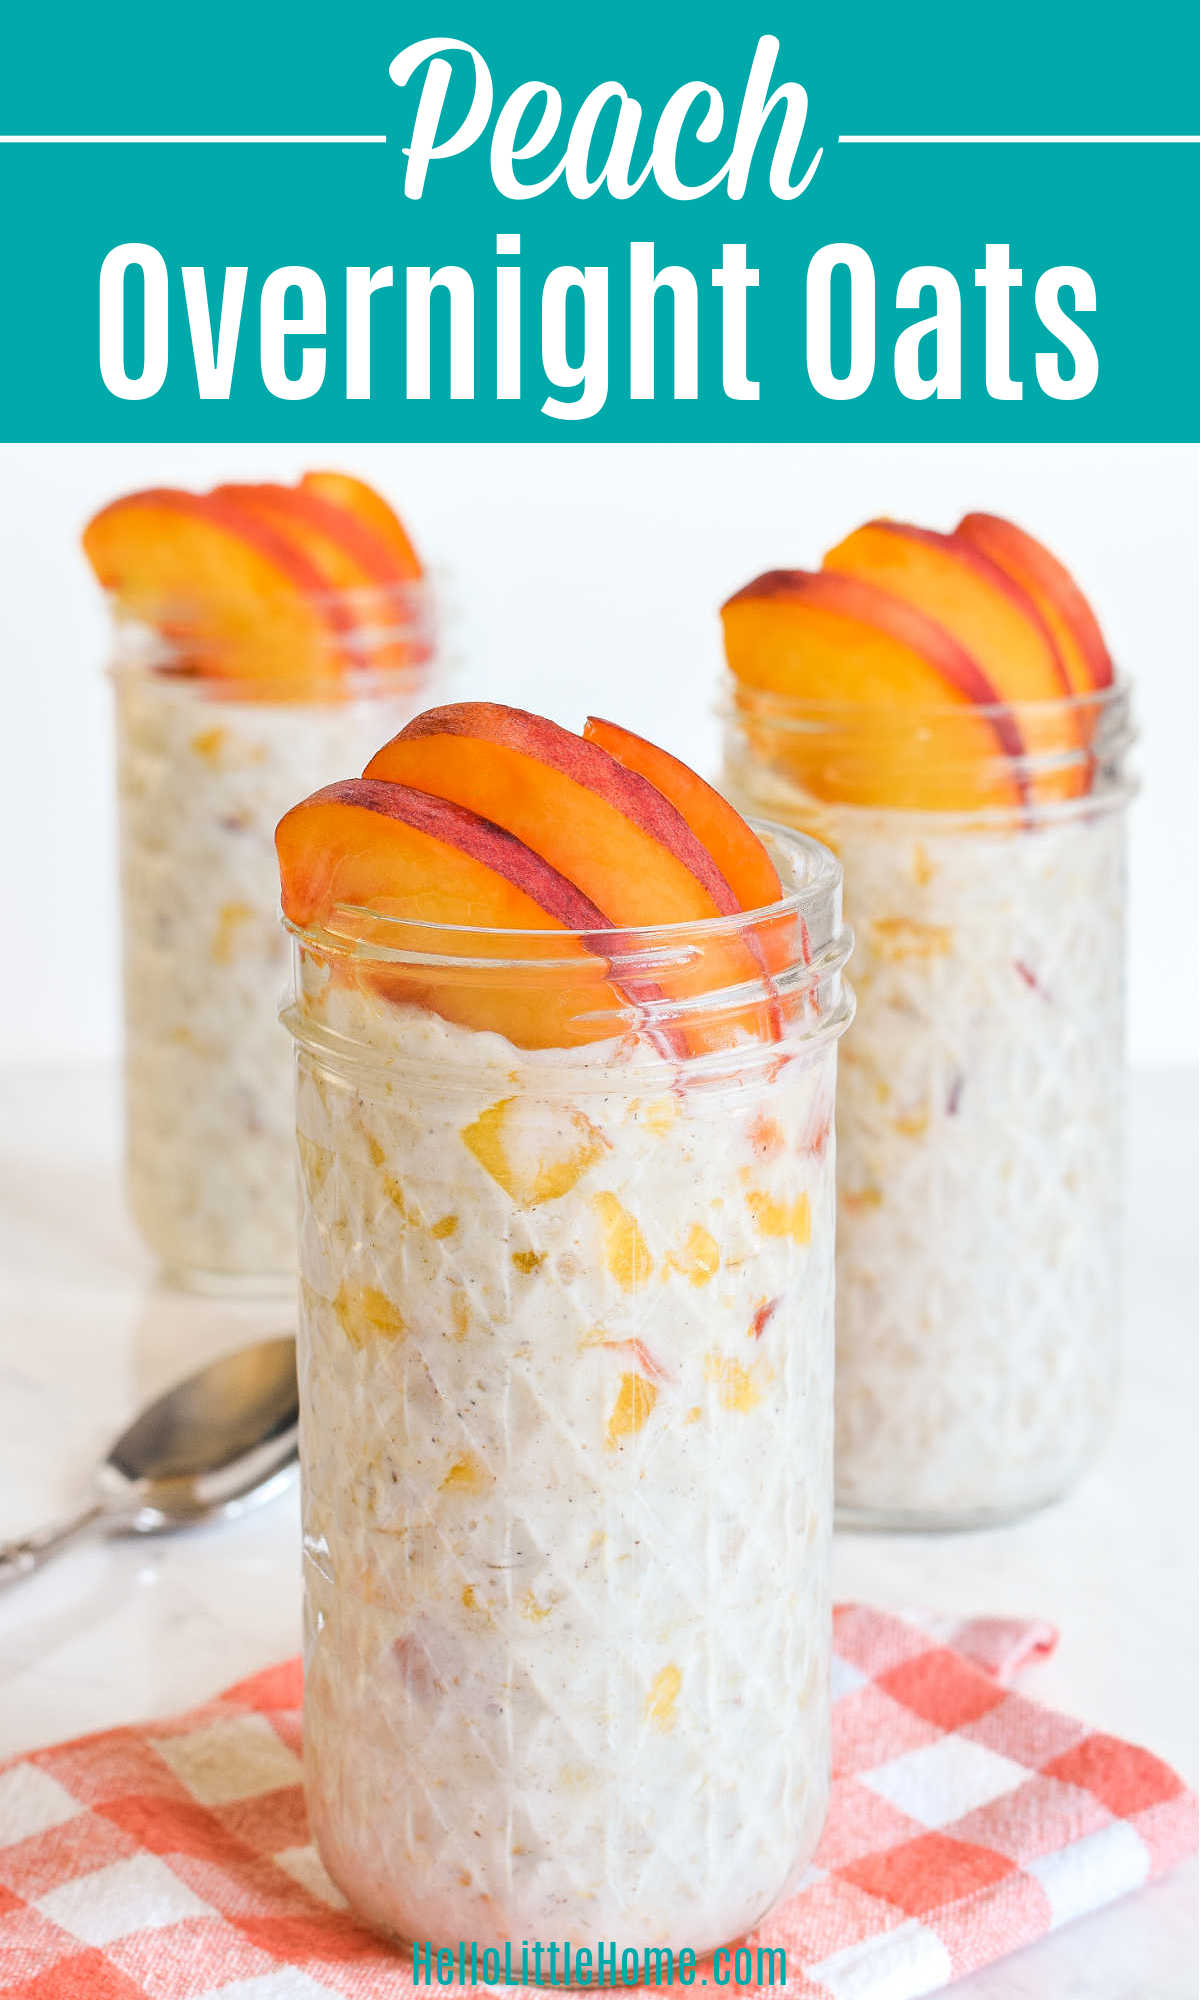 Three jars of Peach Overnight Oats and a checked napkin on a marble counter.